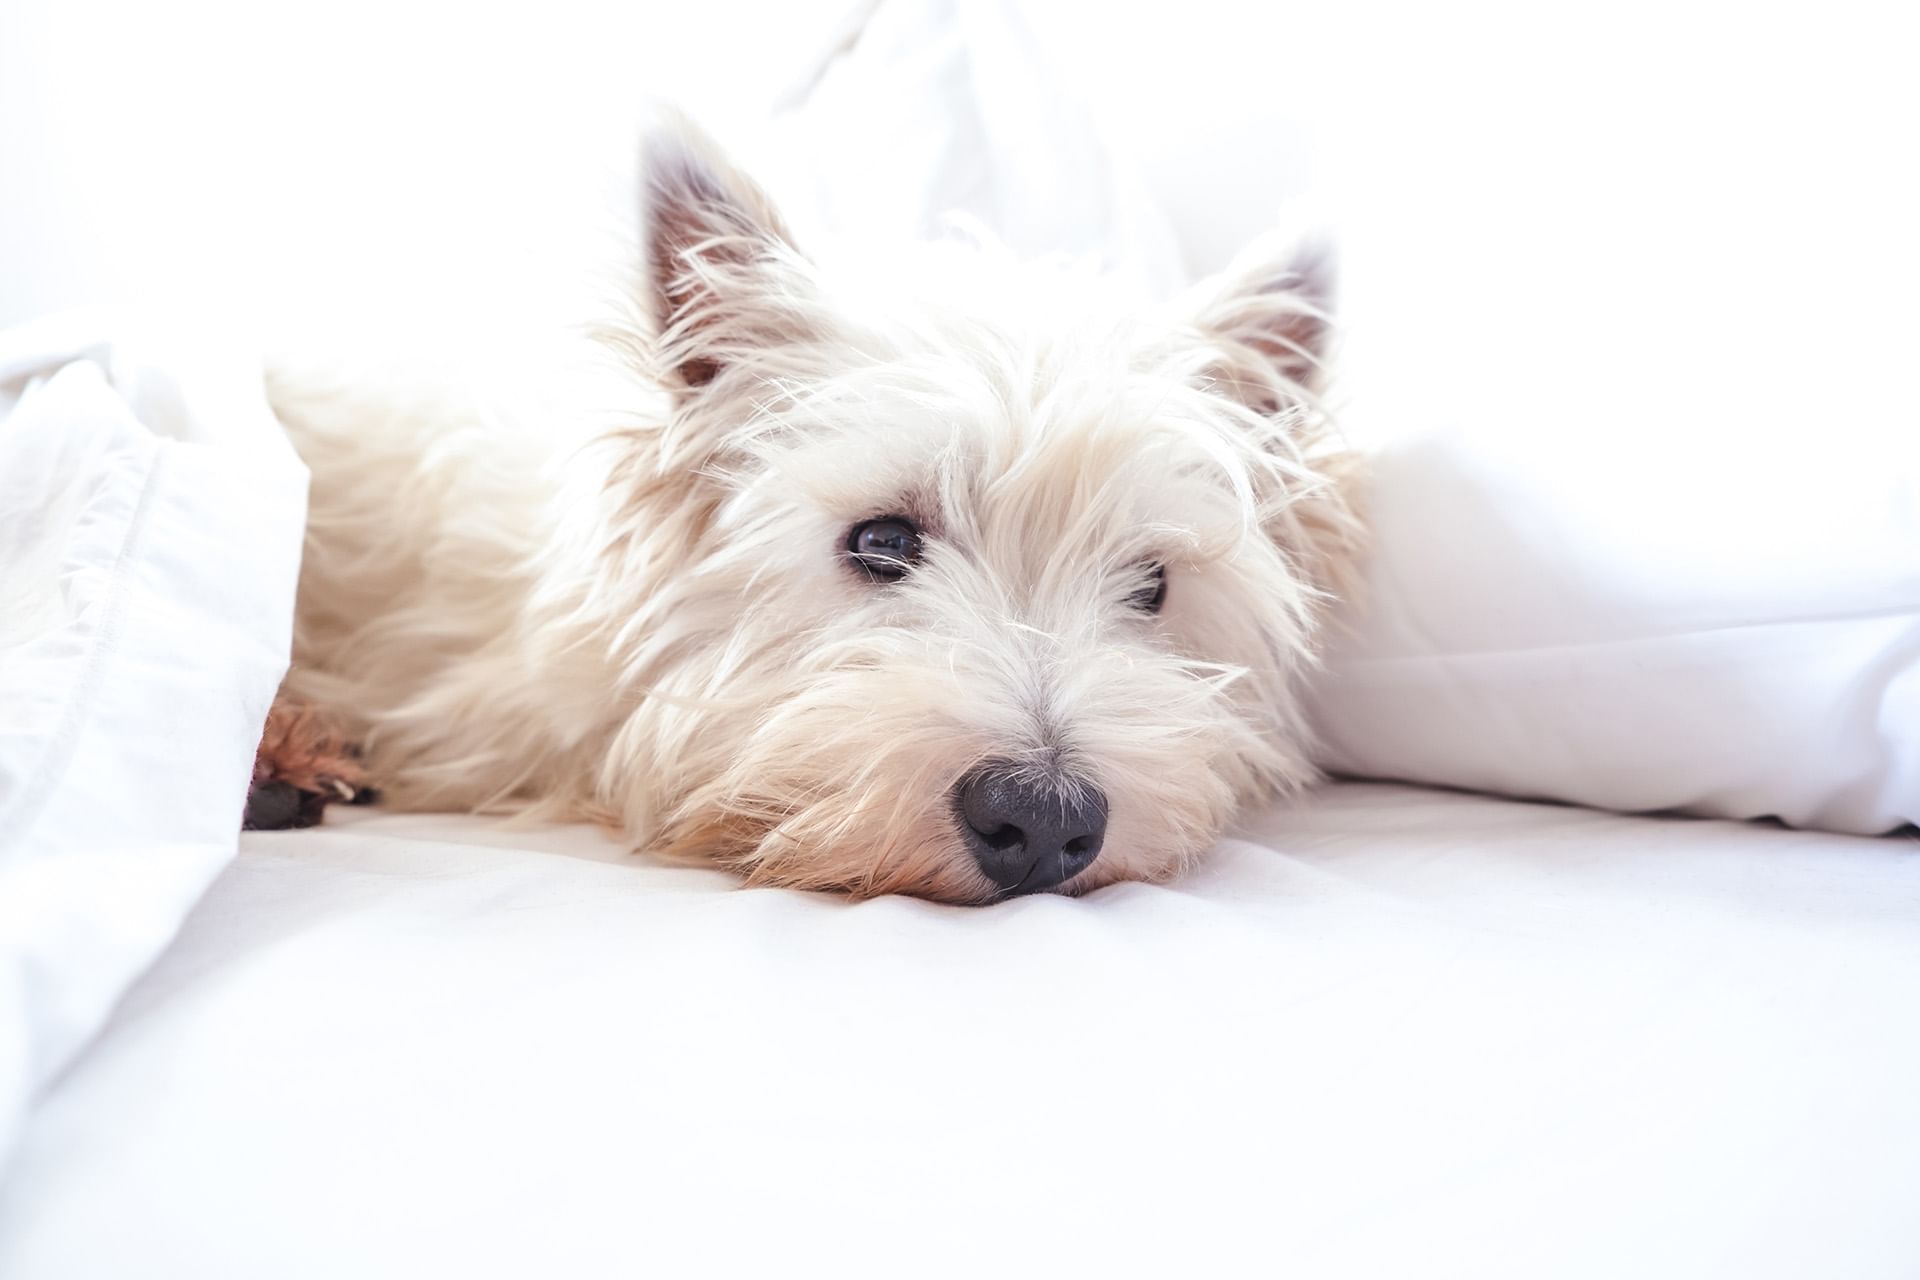 White Terrier resting on a bed with a soft pillow at dog friendly Fiesta Americana Travelty